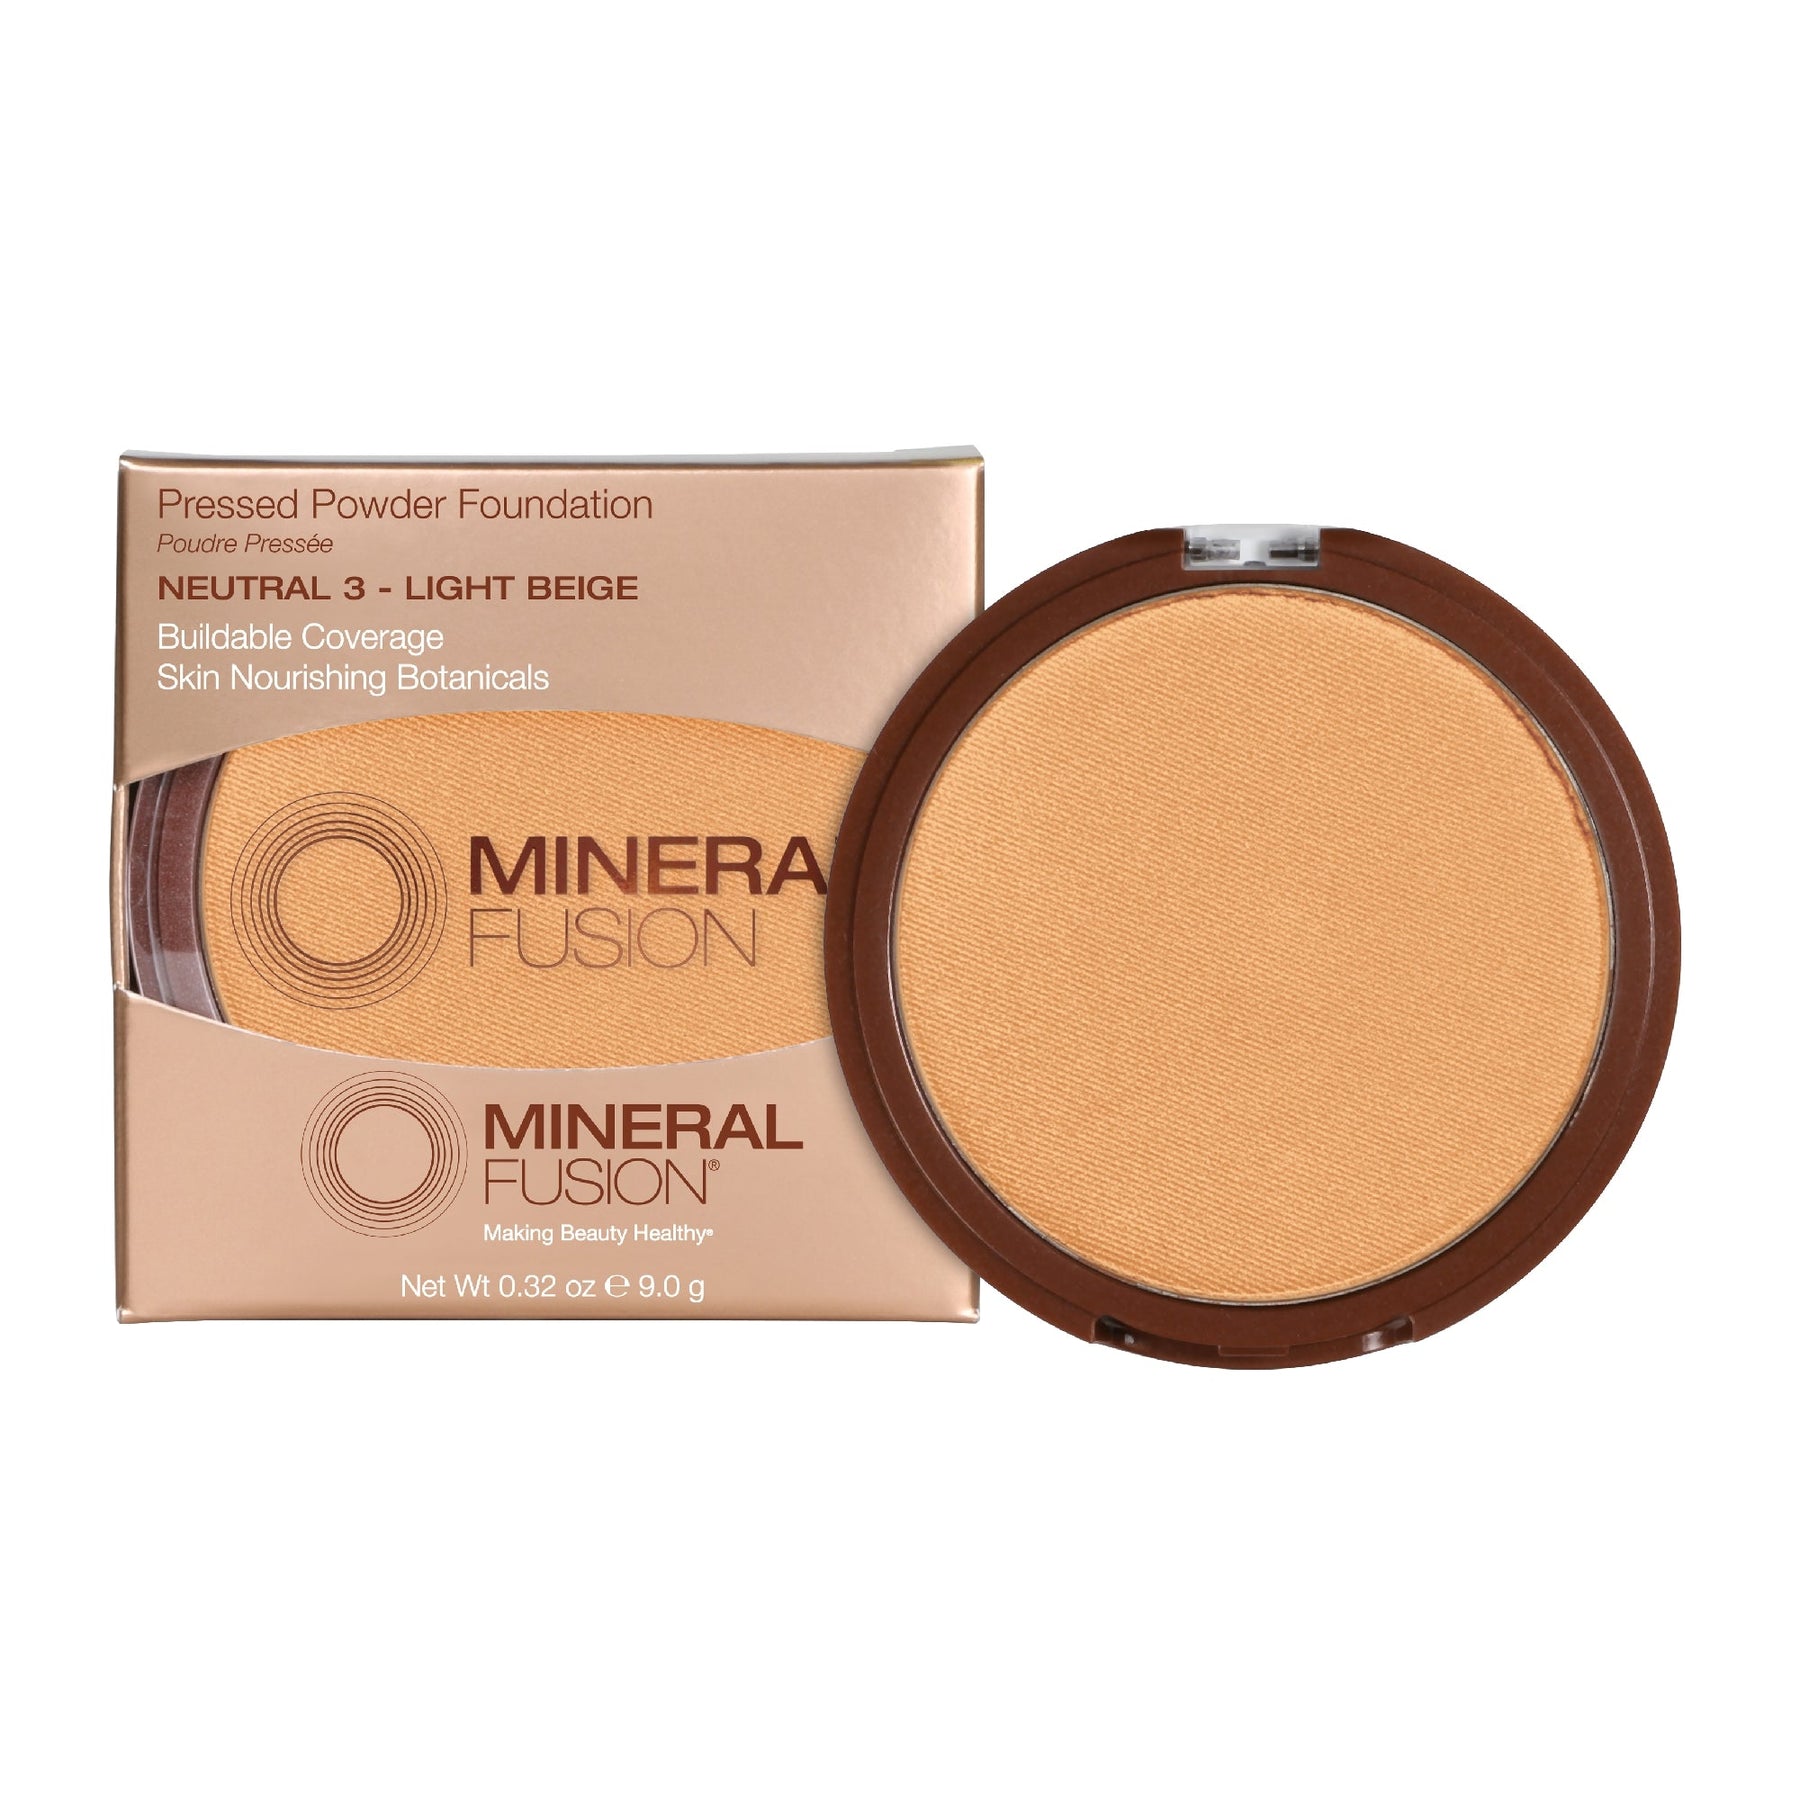 Mineral Fusion - Pressed Powder Foundation - Neutral 3 - Light Beige / .32 oz - ProCare Outlet by Mineral Fusion